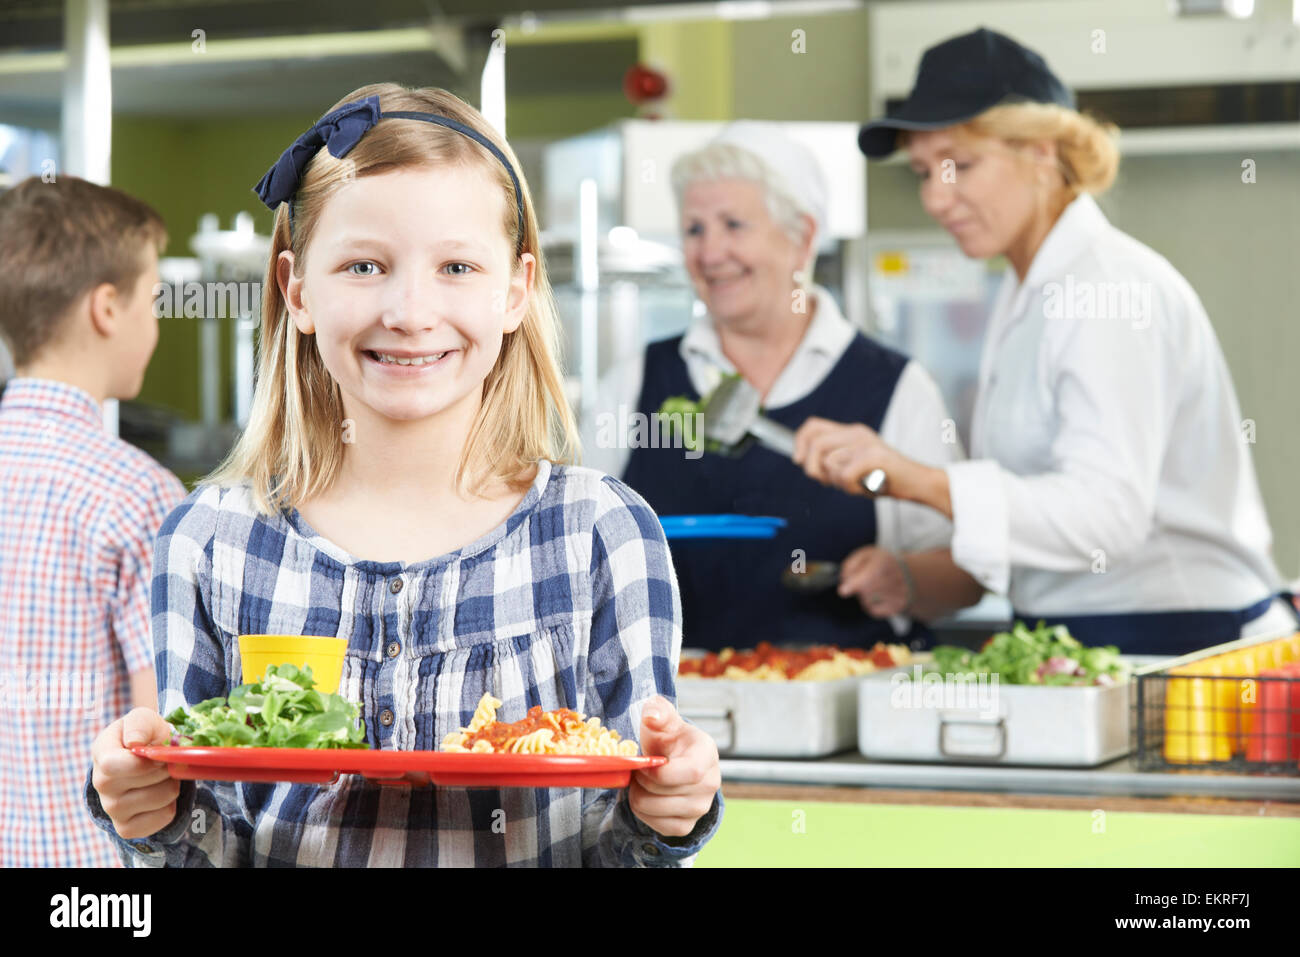 Female Pupil With Healthy Lunch In School Canteen Stock Photo